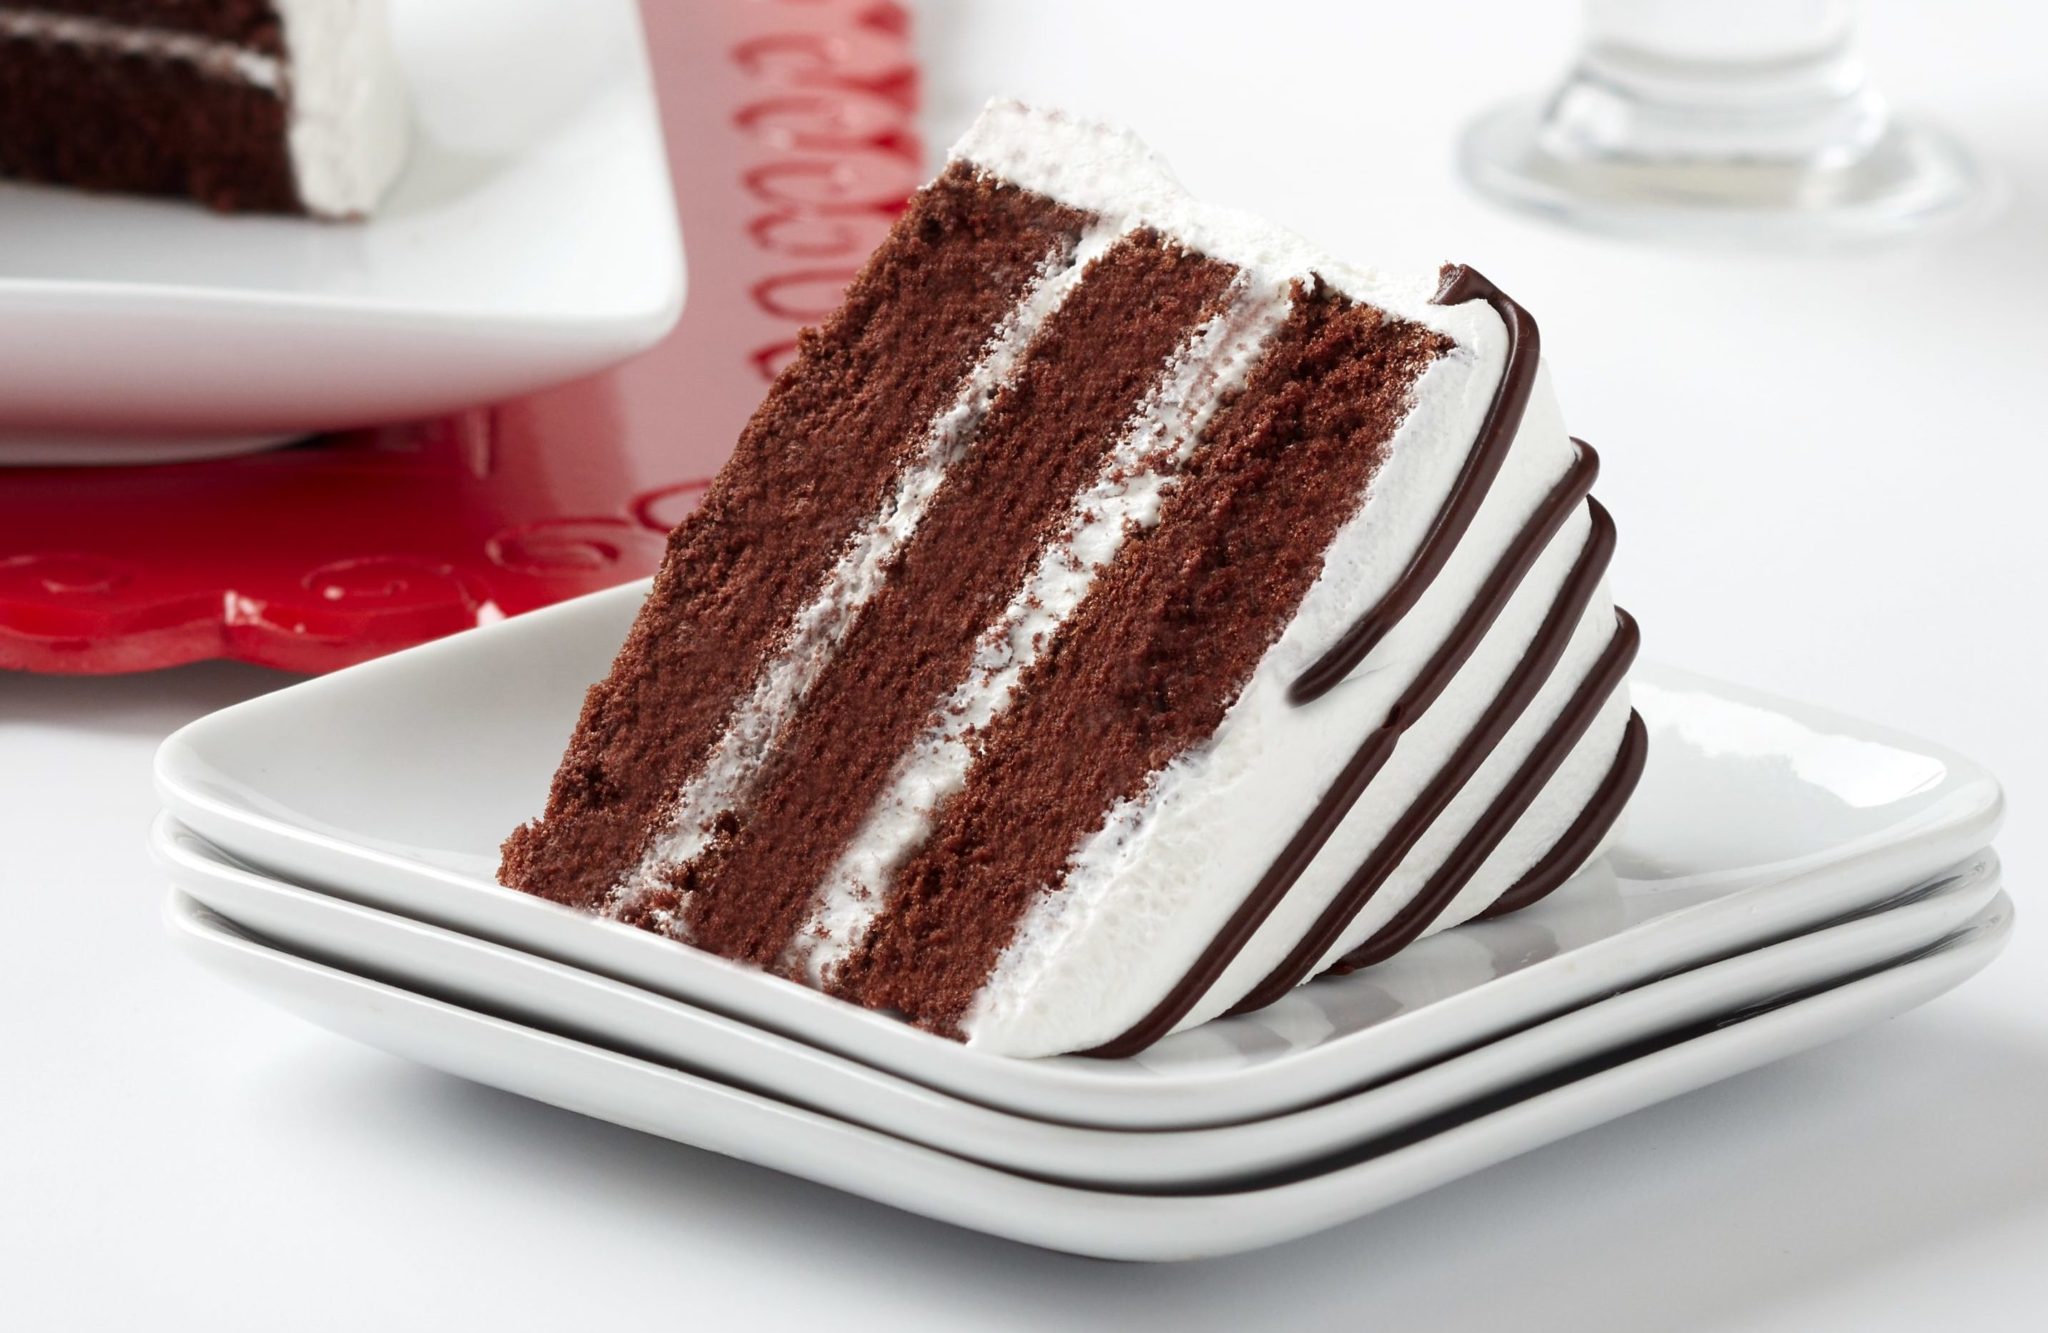 Top 20 Most Delicious And Popular Cakes In The USA